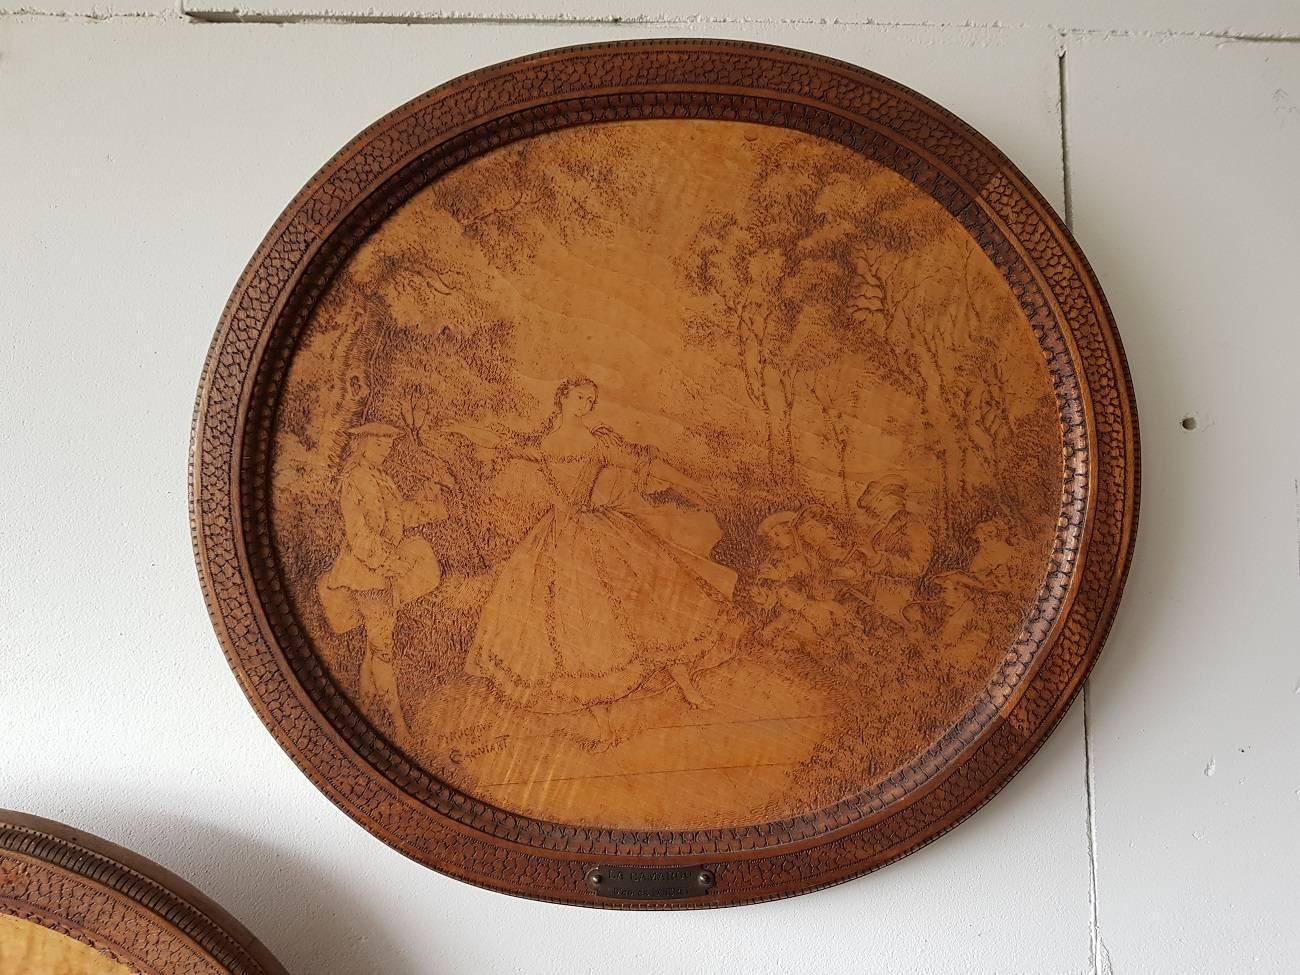 Two French pyro engravings in the style of Lancret made circa 1880, both have a romantic scene after paintings by Lancret. These are very nice handcrafted with a hot needle to burn the wood and make shadows to get a image.
Both are titled on a